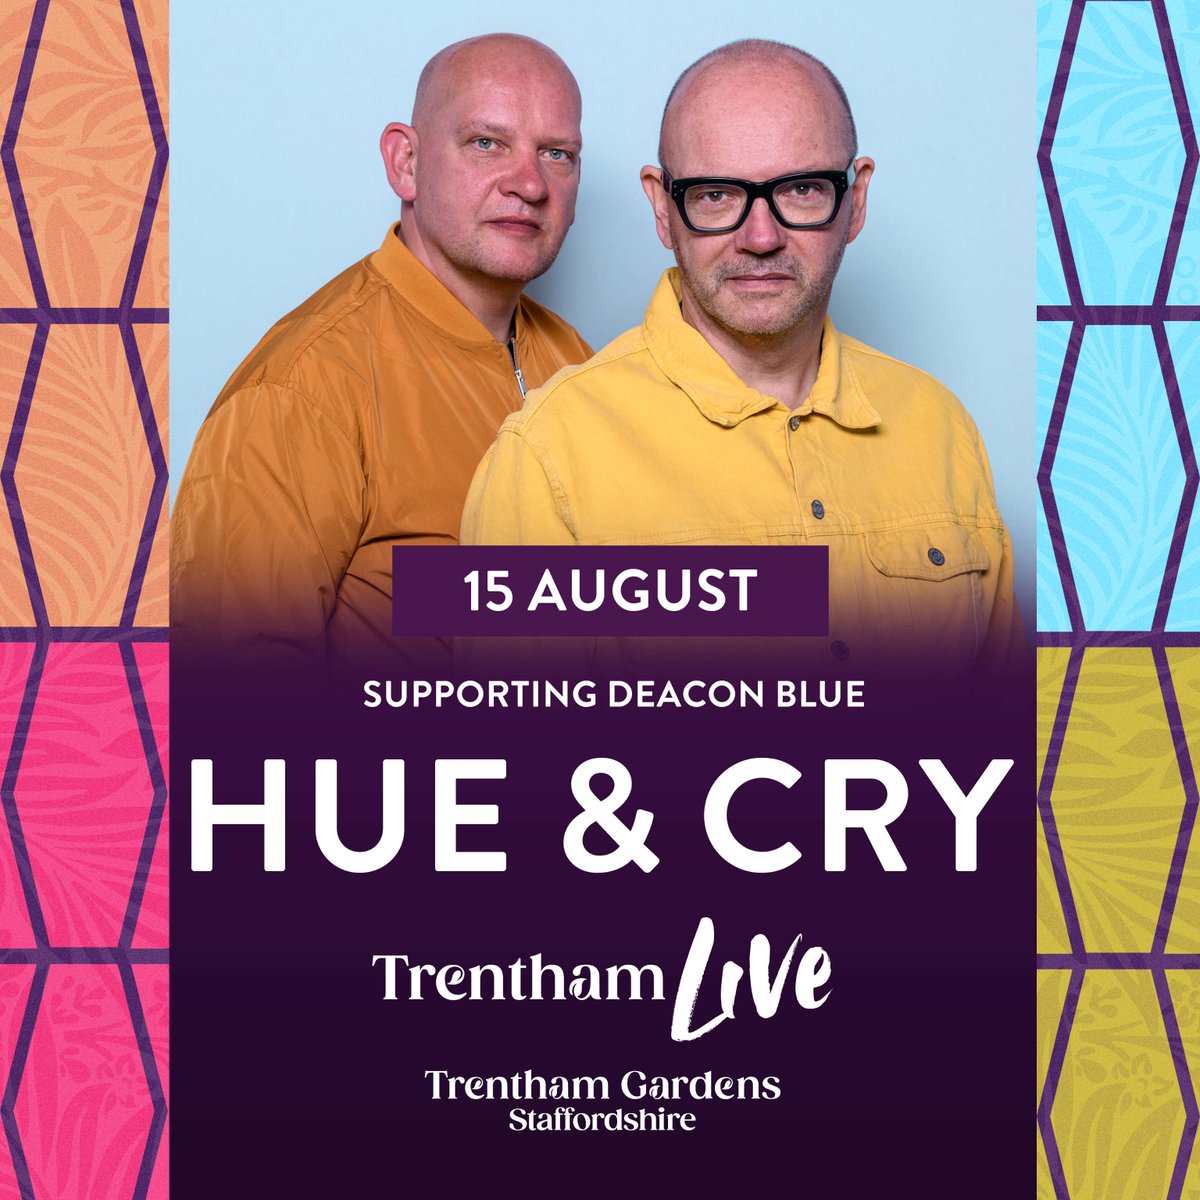 🎶 Our final support act announcement for this summer's @TrenthamLive! 🎉 We are thrilled to announce that Scottish pop band @HueandCry will be joining our Thursday night line up, supporting Deacon Blue on 15th August! 👉 bit.ly/TrenthamLive20…